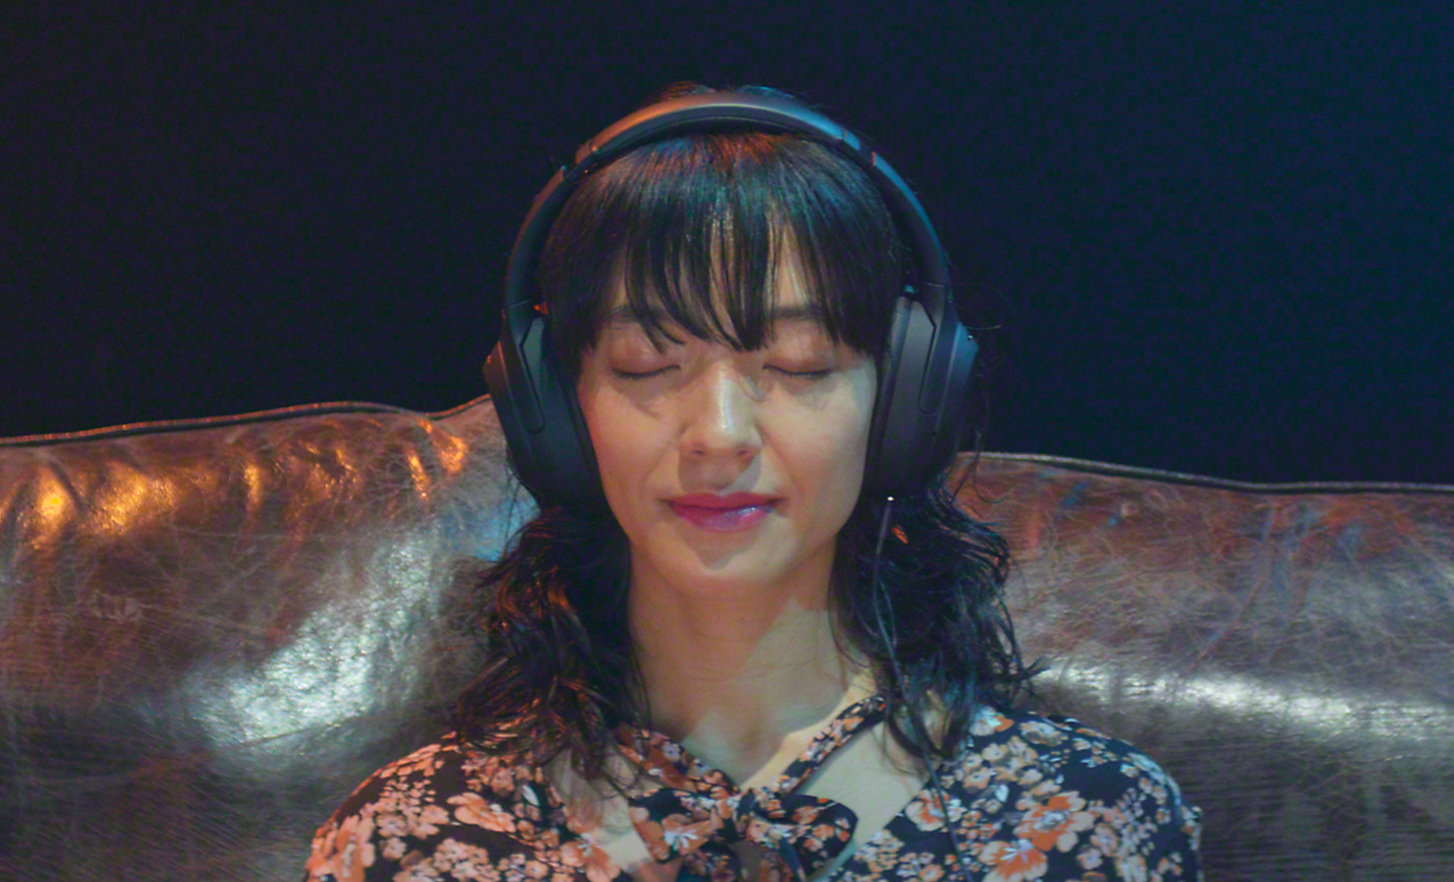 A woman with listening to music on headphones with her eyes closed